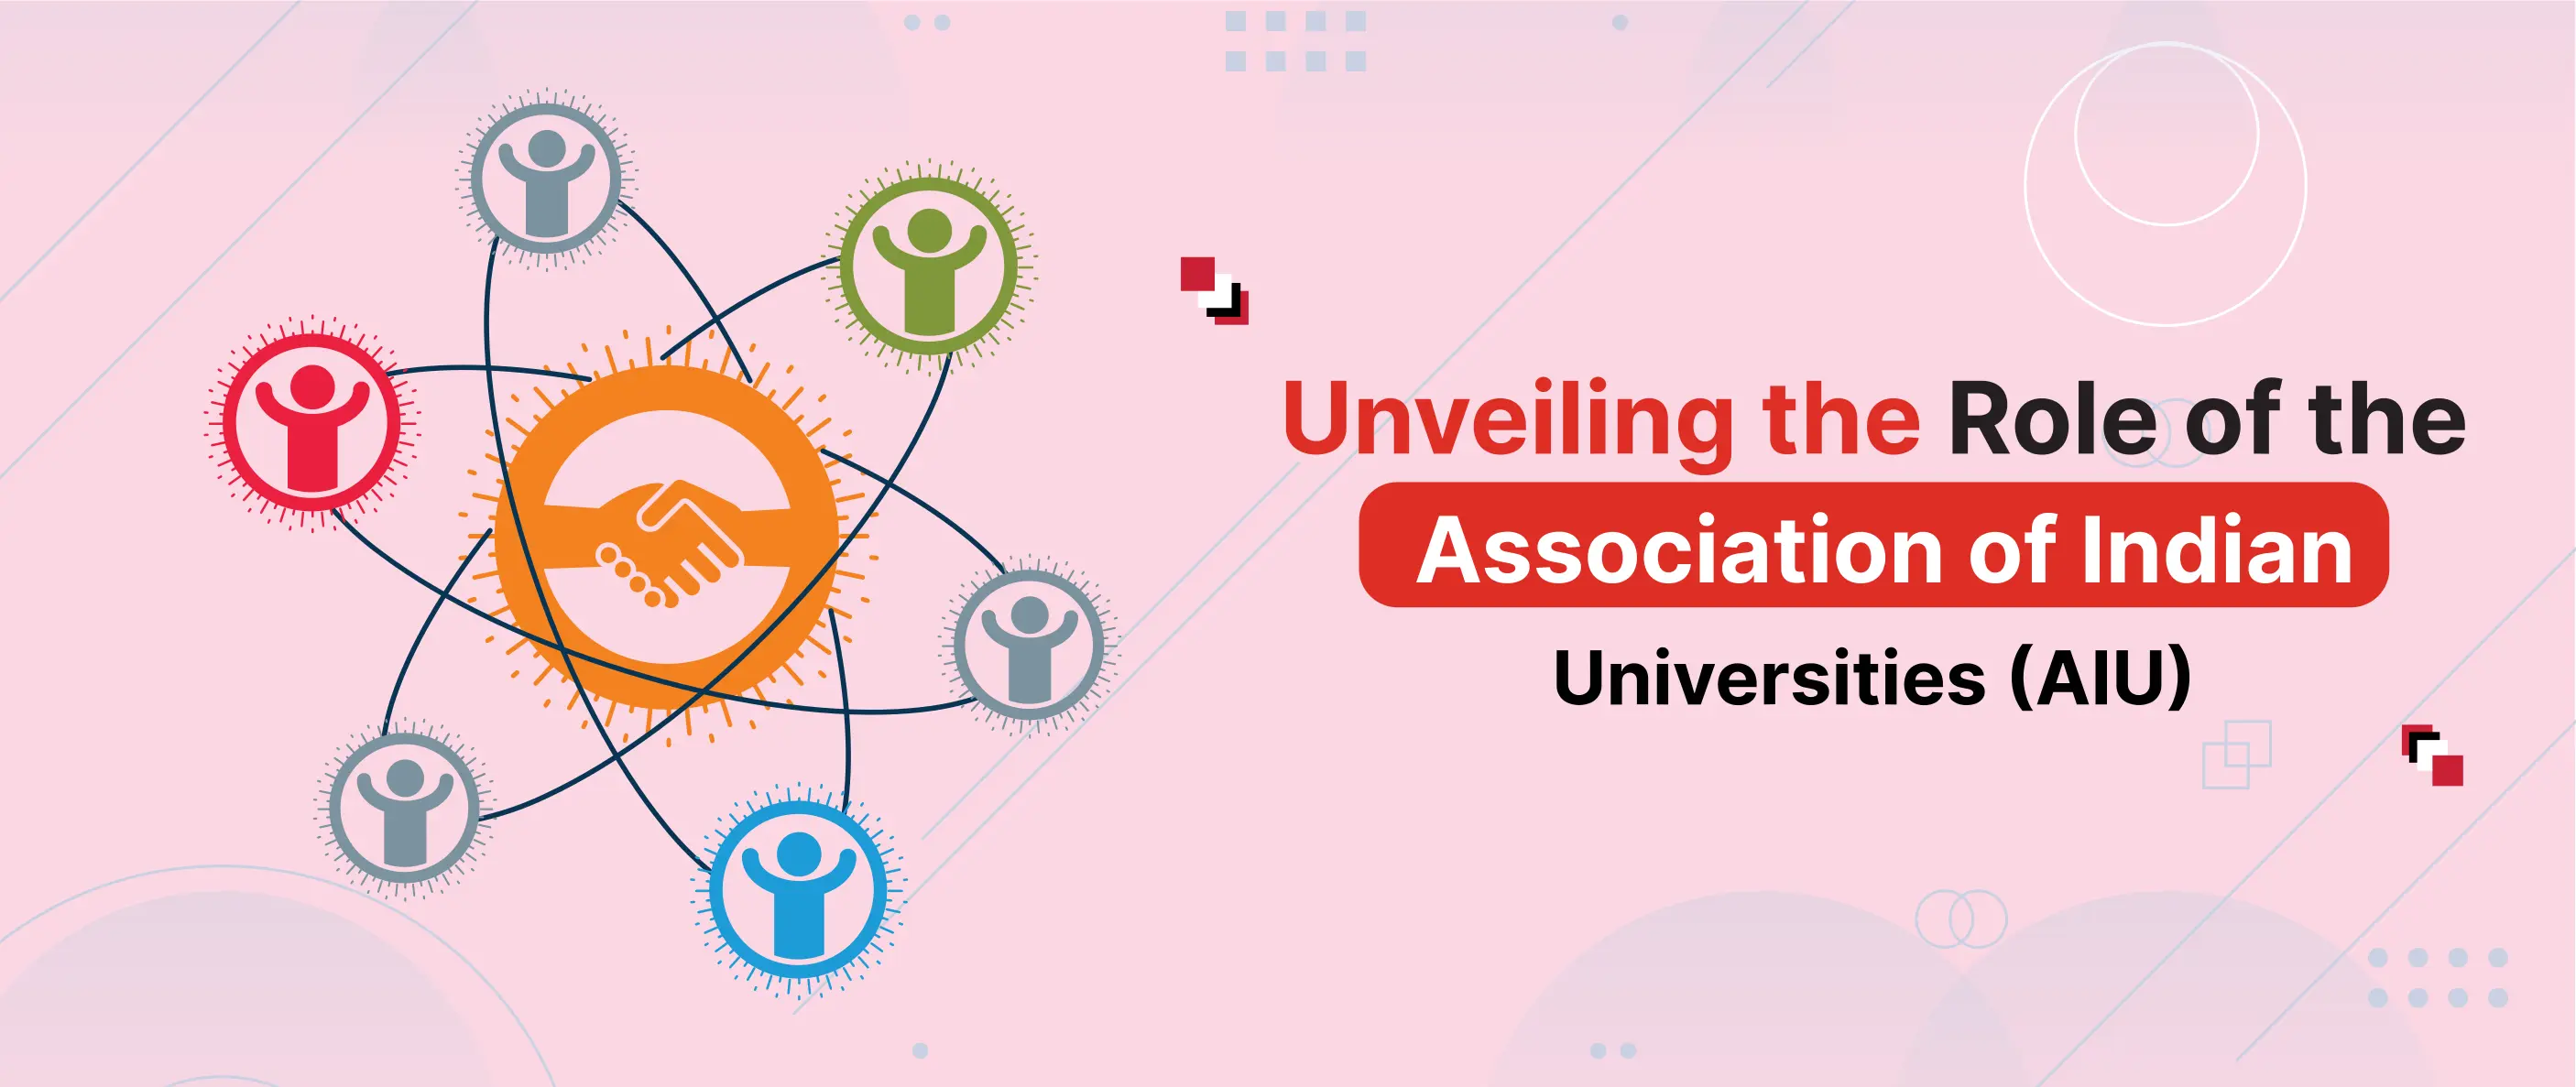 Unveiling the Role of the Association of Indian Universities (AIU)